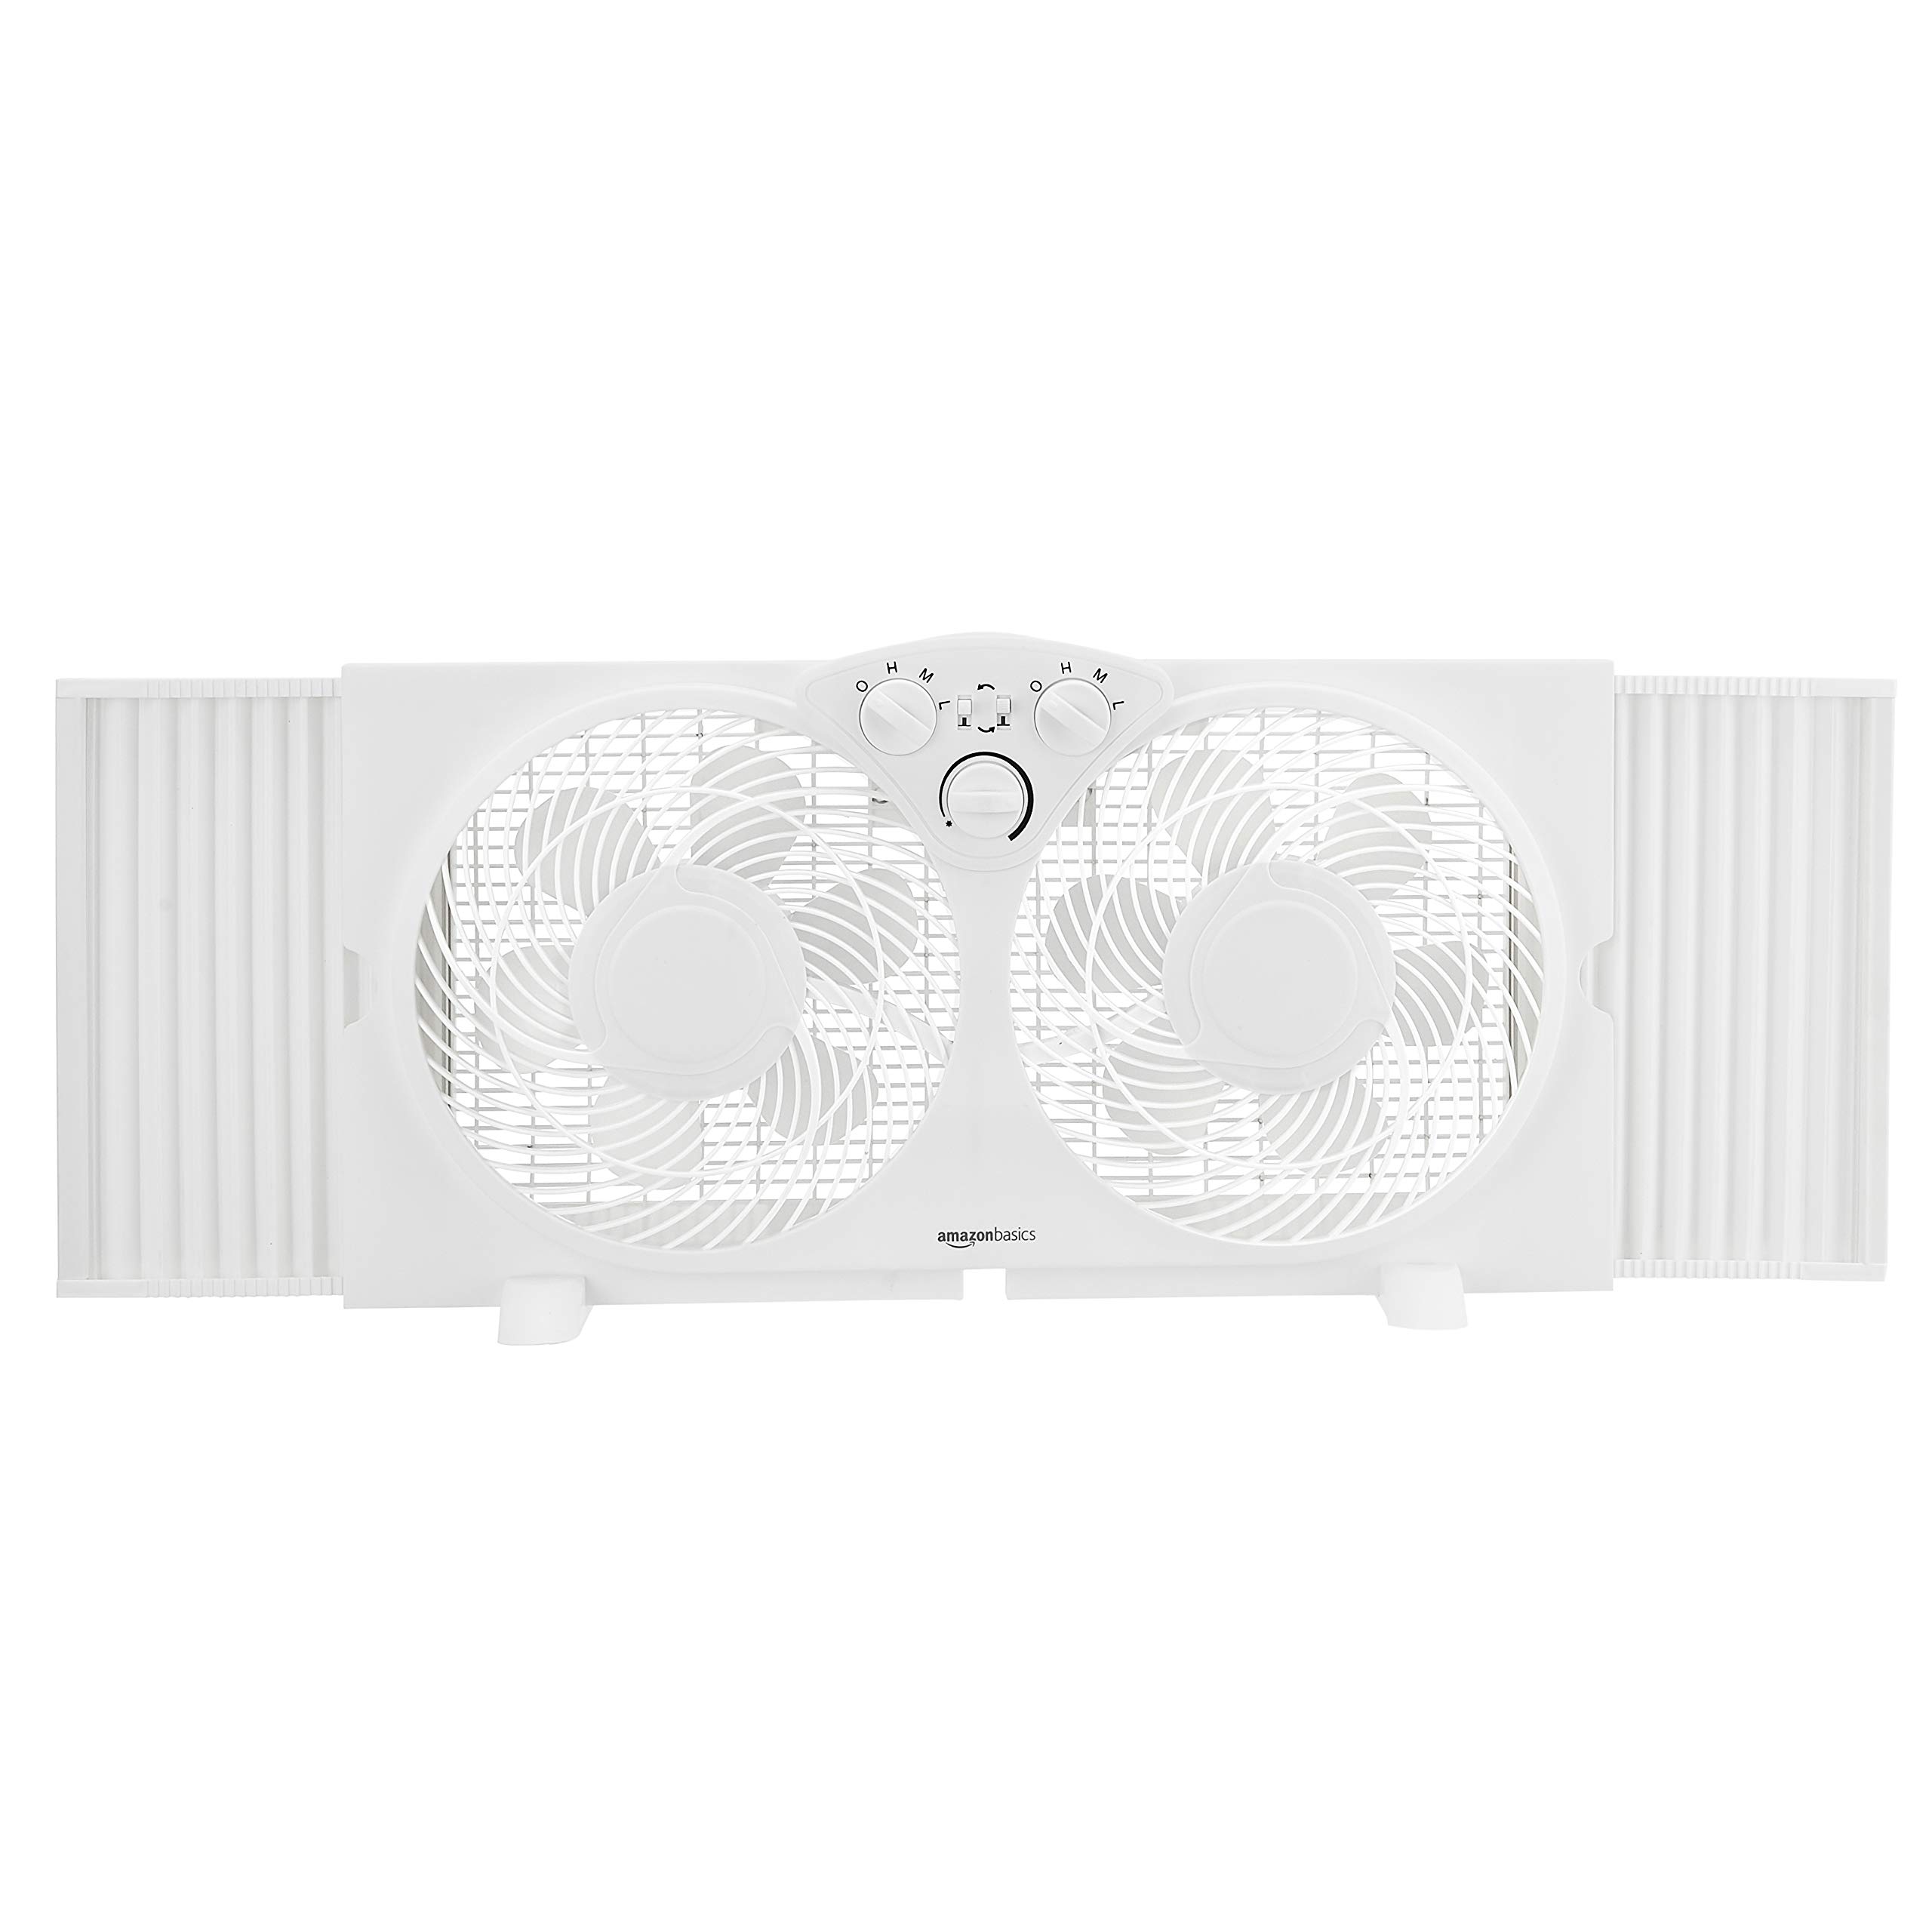 Amazon Basics Window Fan with Manual Controls, Twin 9 Inch Reversible Airflow Blades, White